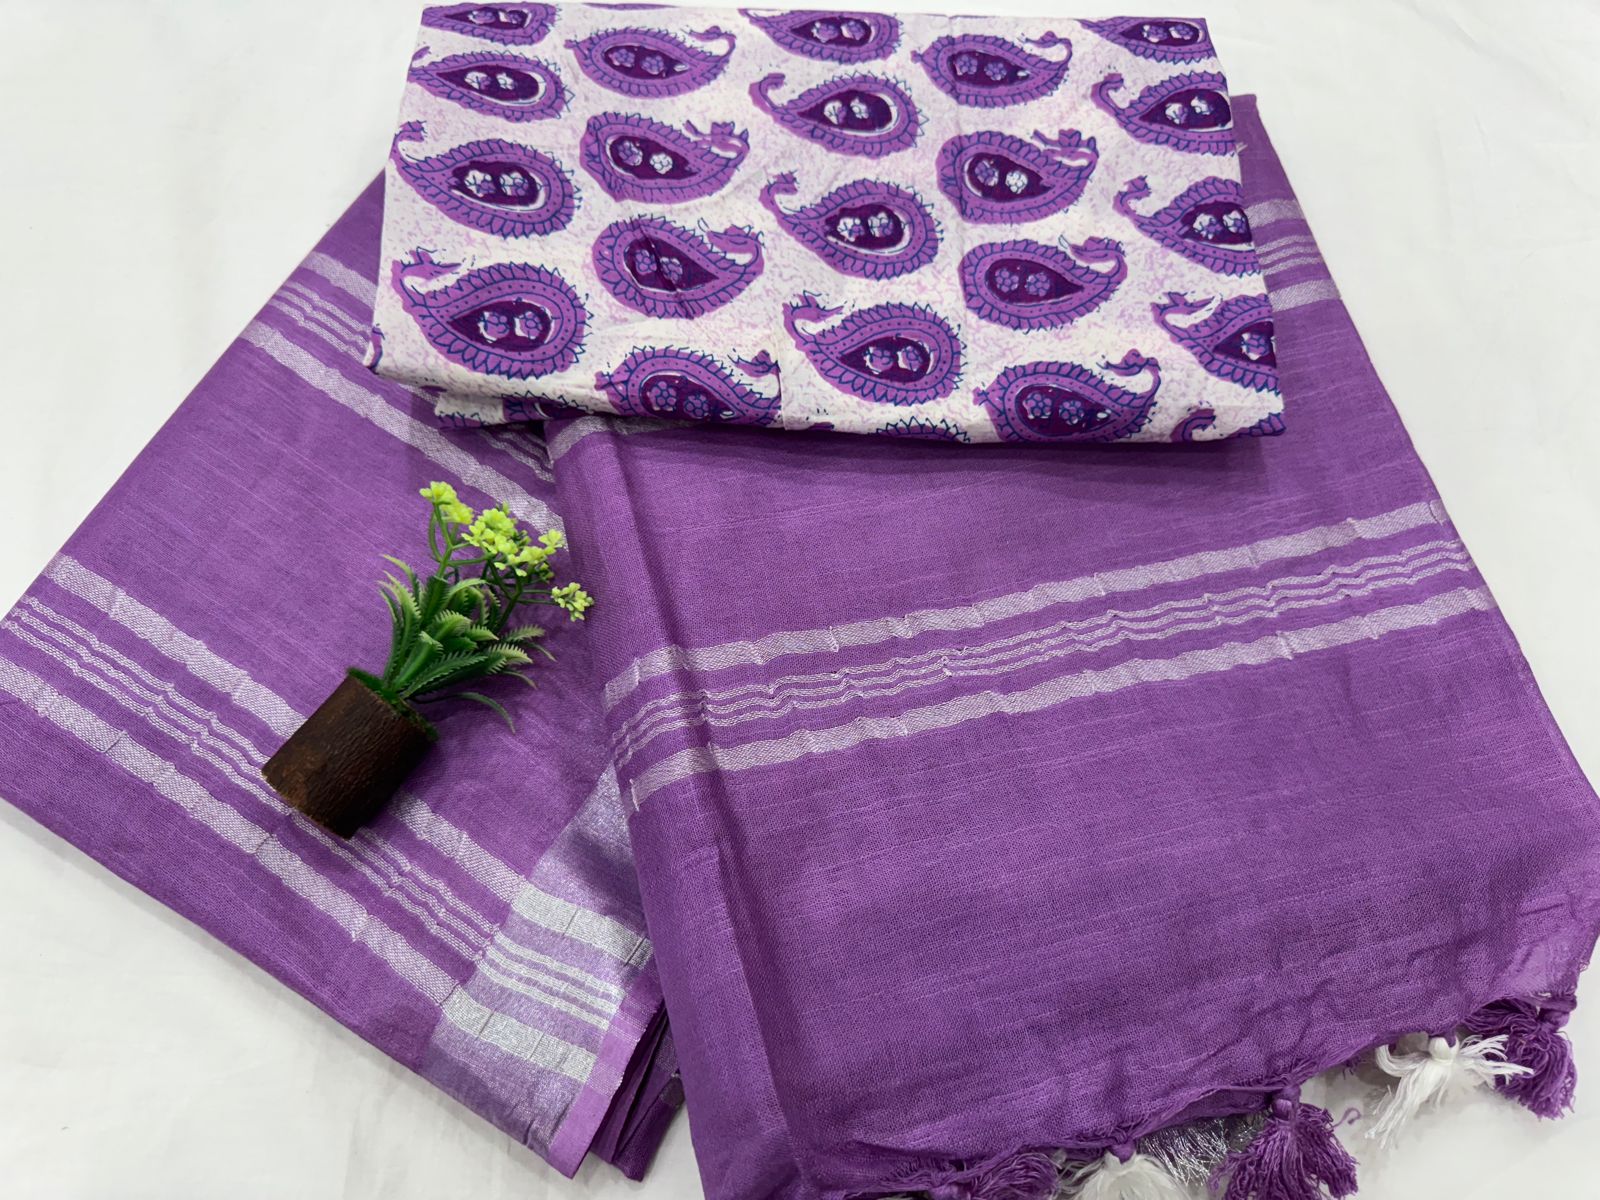 Vibrant Purple Daily Linen Saree with Paisley Motifs